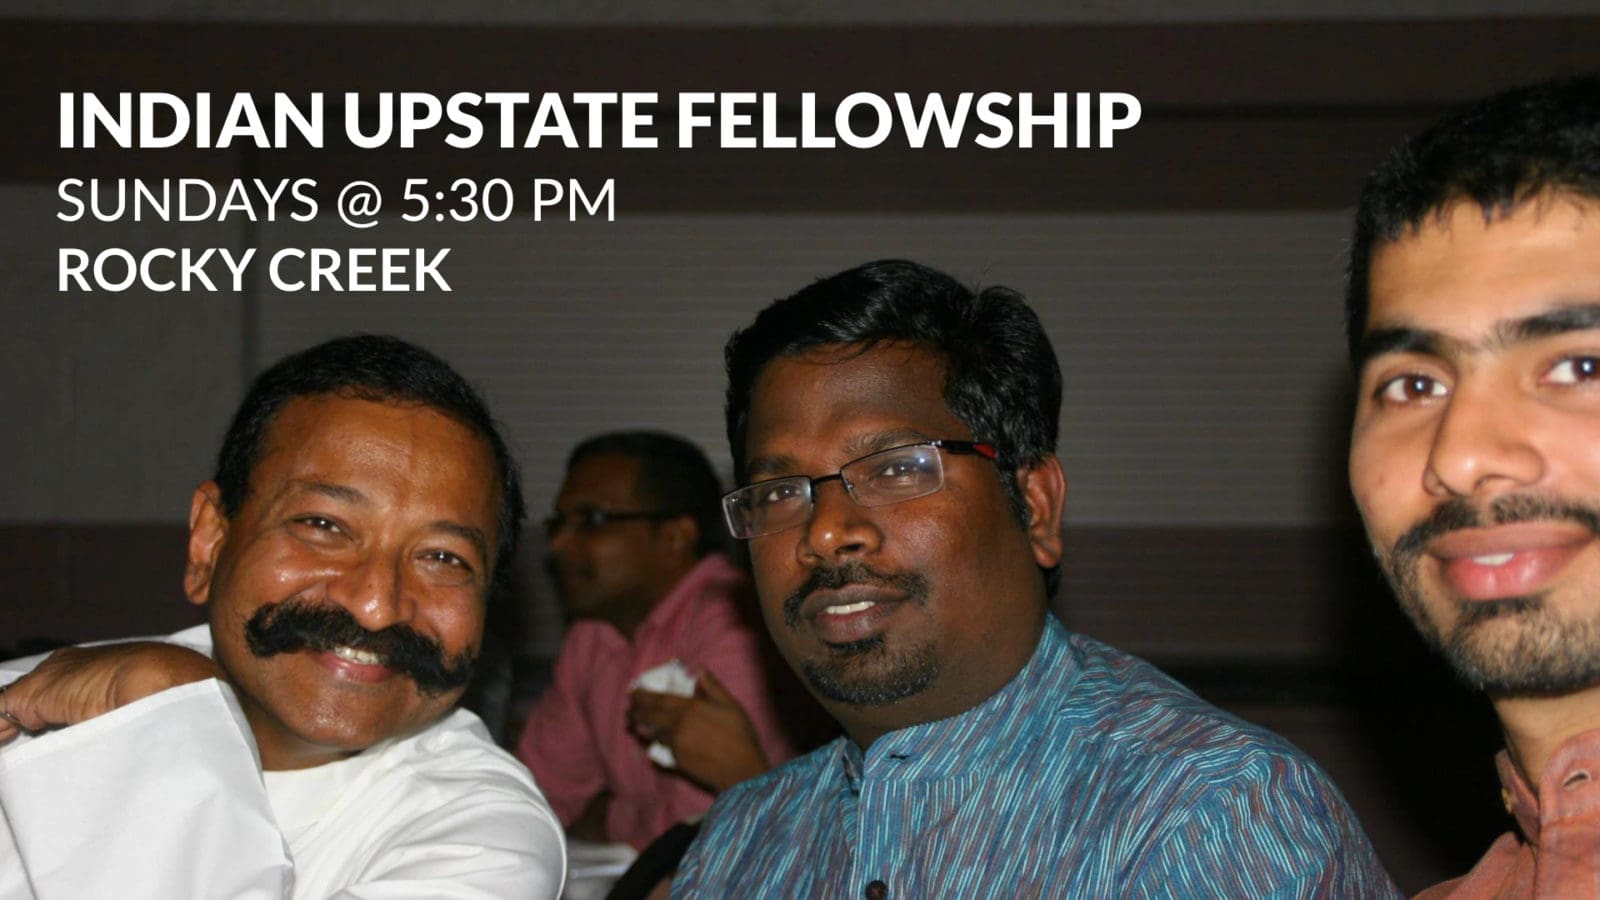 Connect with Indian Upstate Fellowship